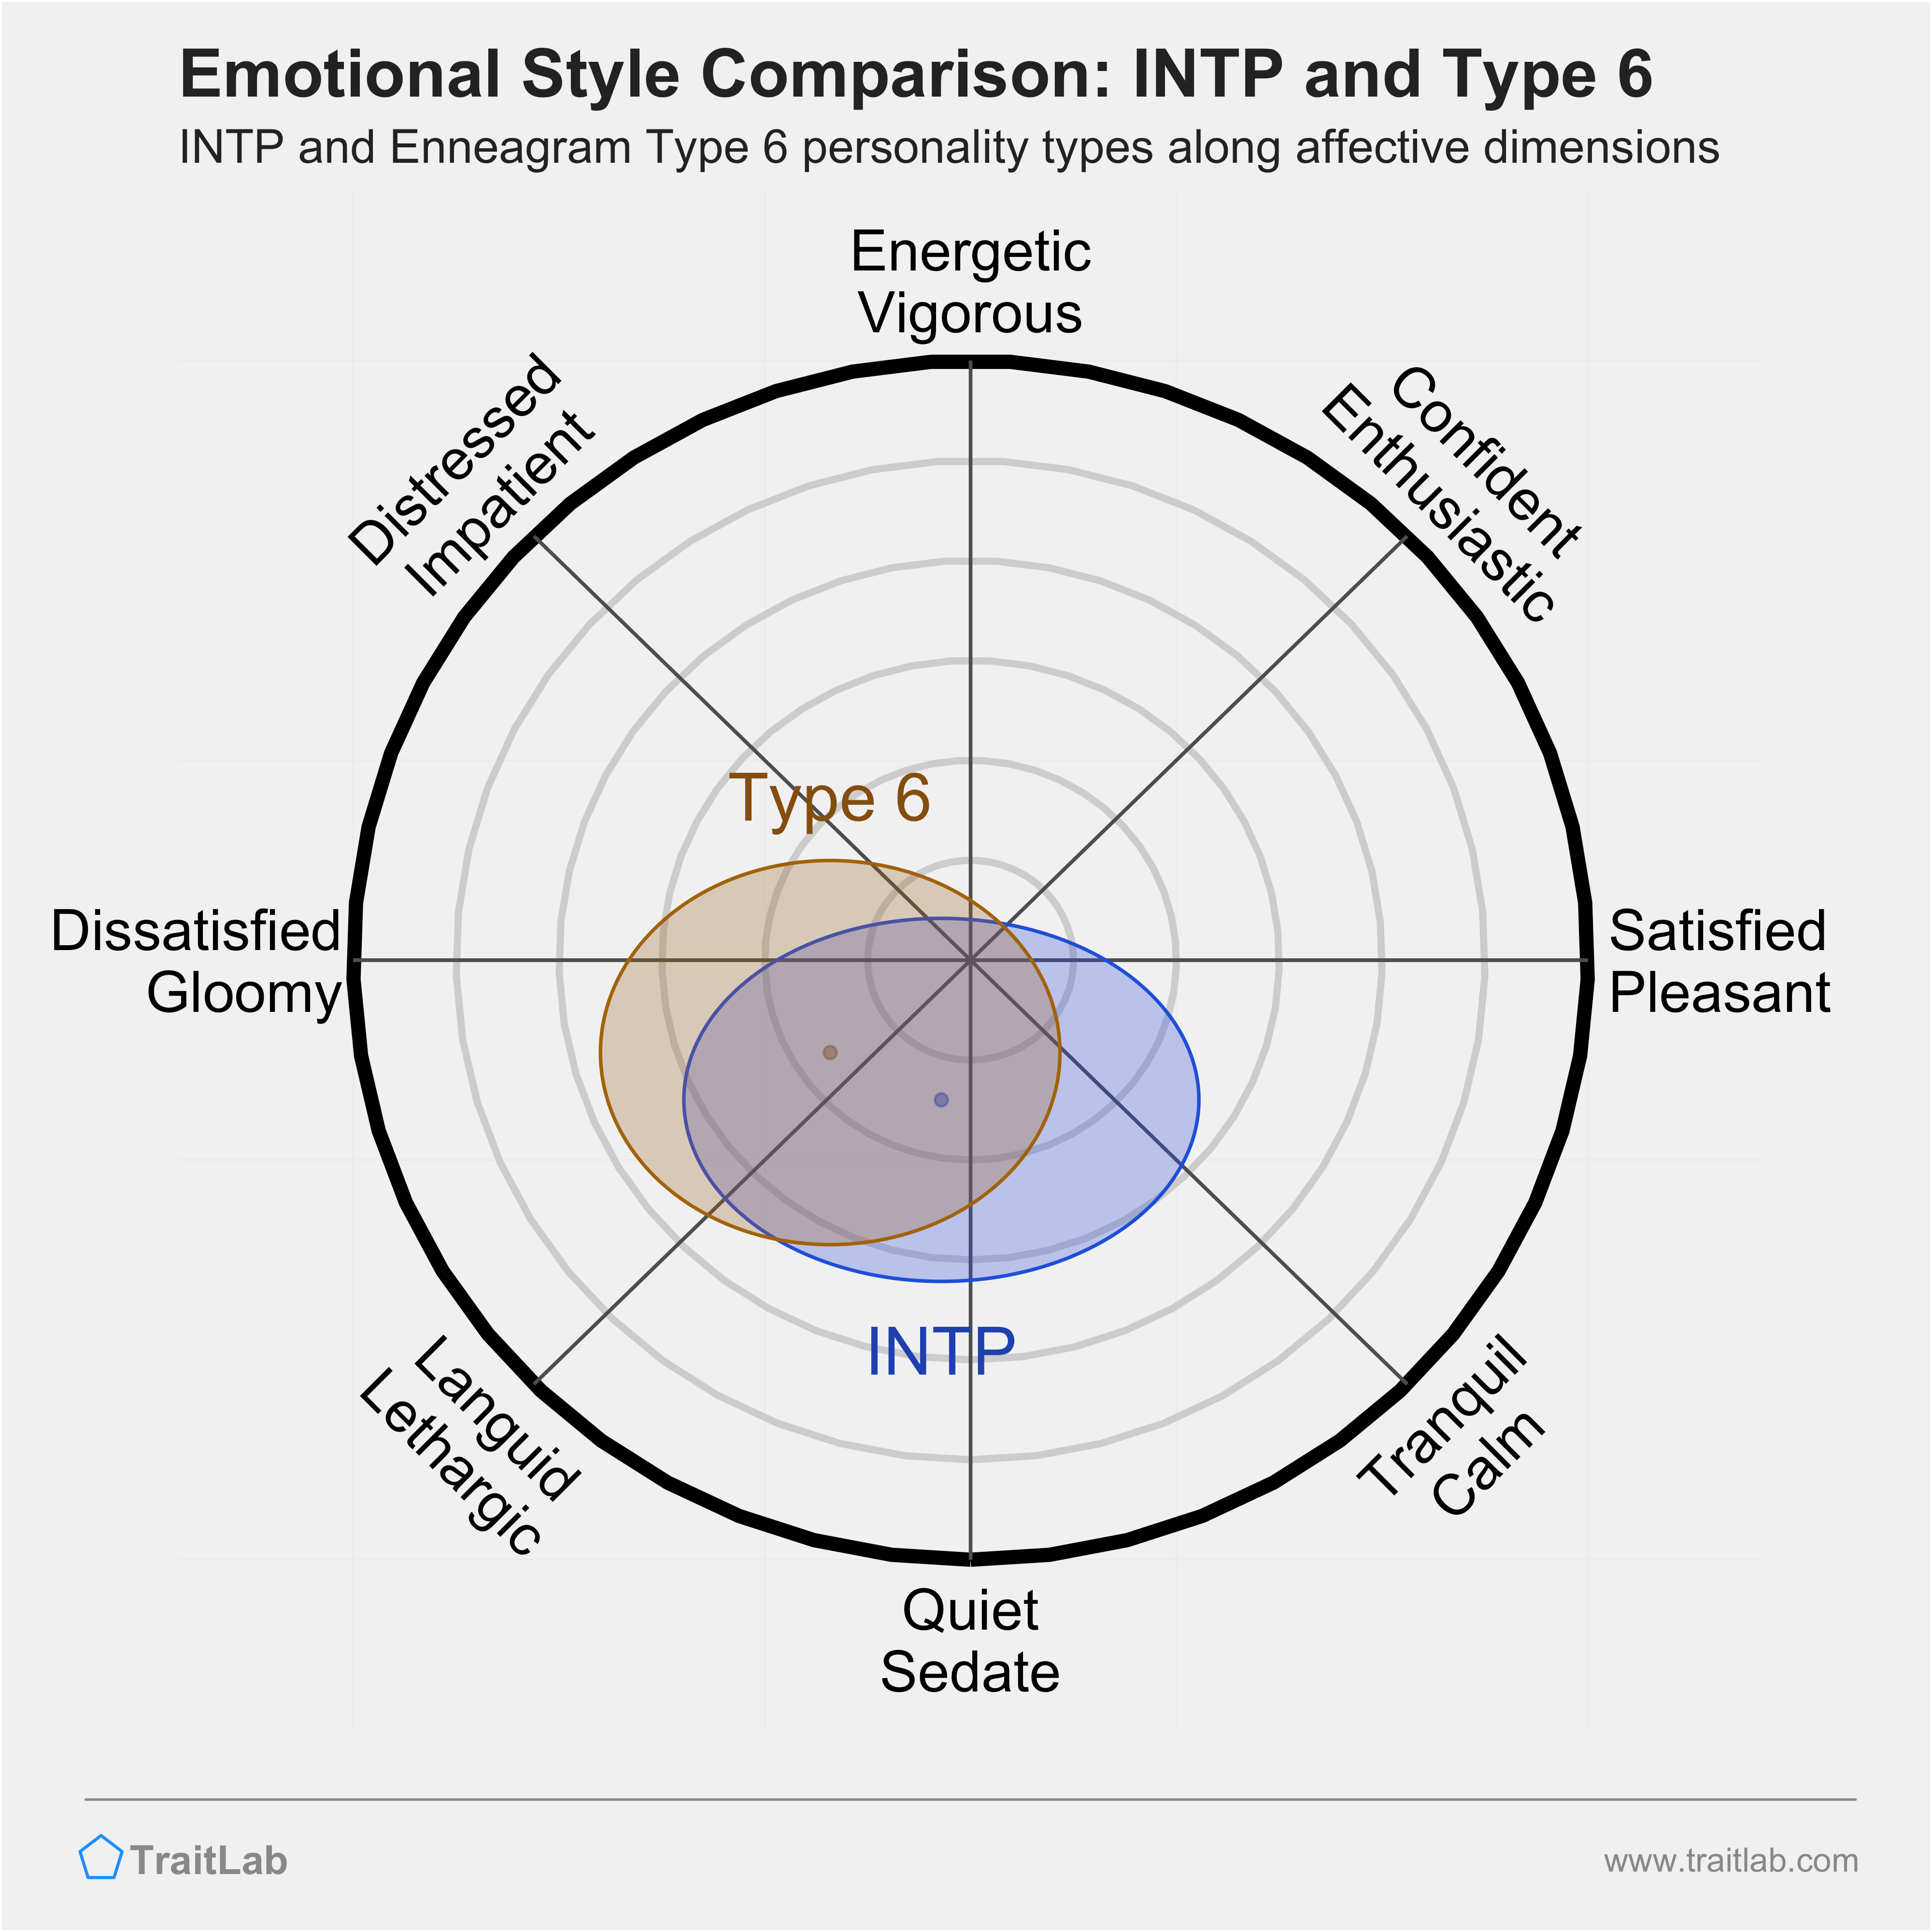 INTP and Type 6 comparison across emotional (affective) dimensions